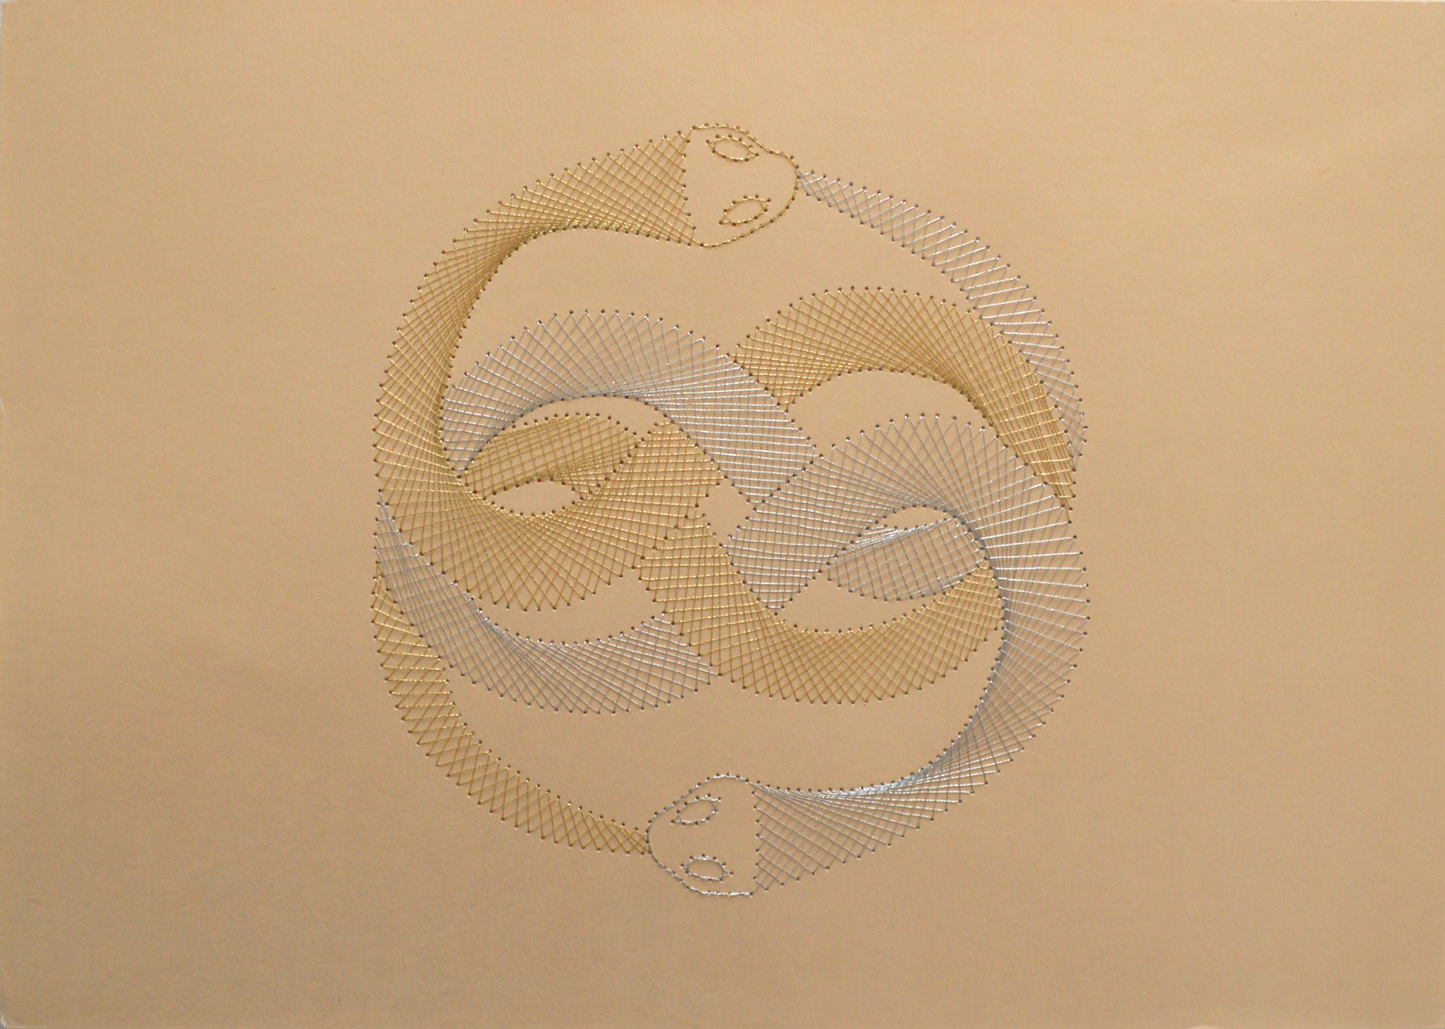 Auryn (The Neverending Story) Inspired Hand-Stitched Artwork (Cream Card)